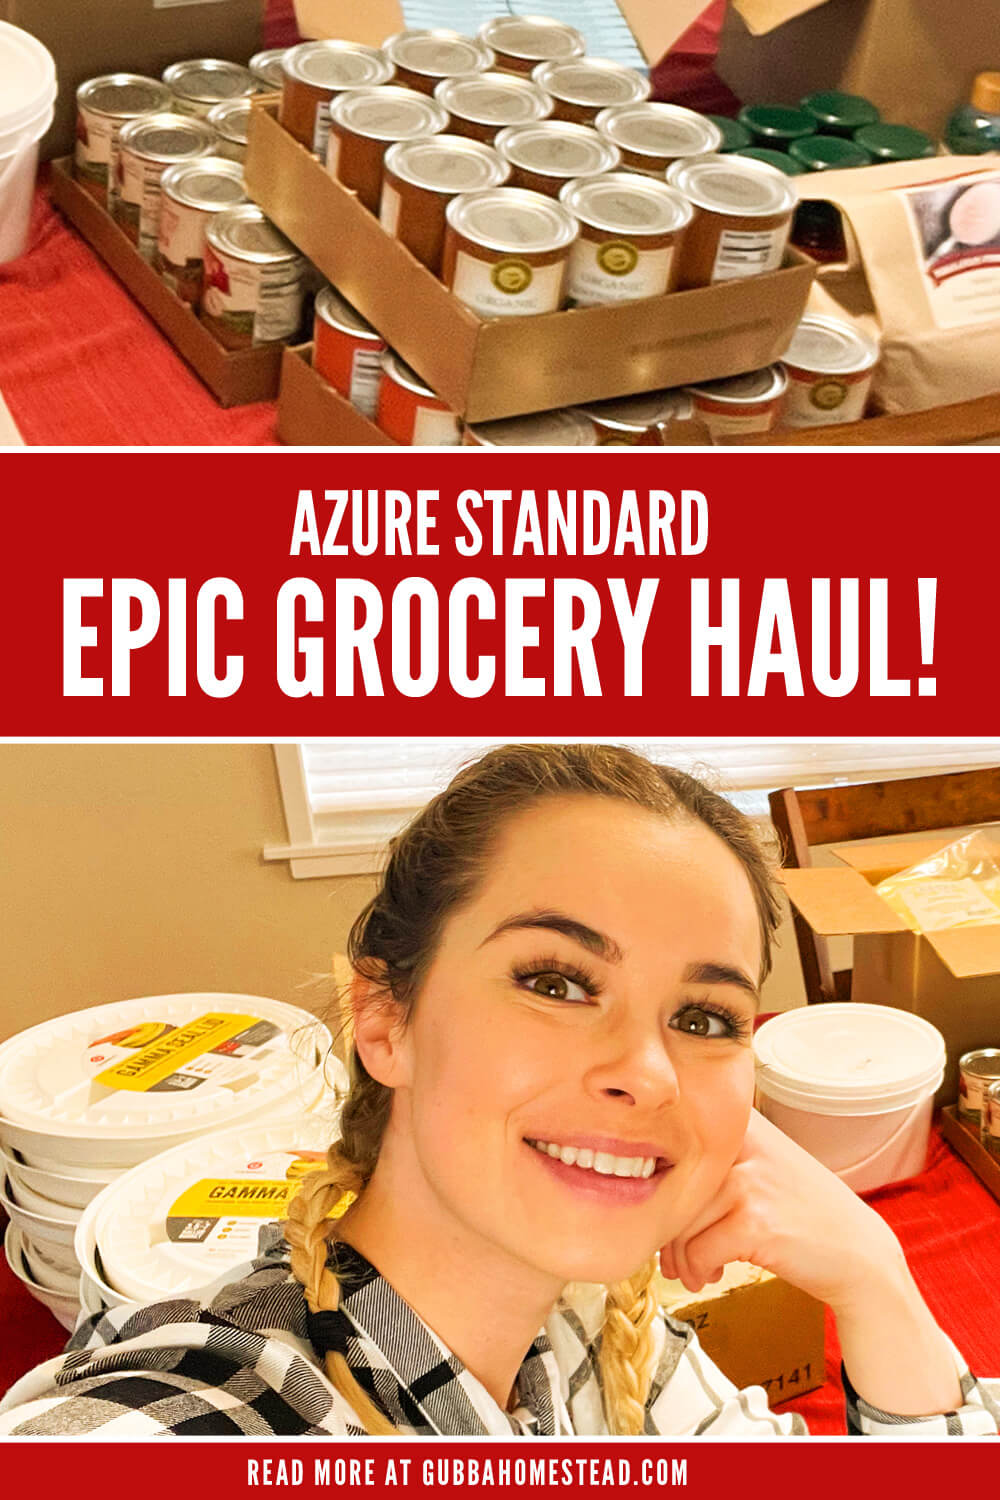 Azure Standard Grocery Haul For Prepping & Being Prepared On The Homestead